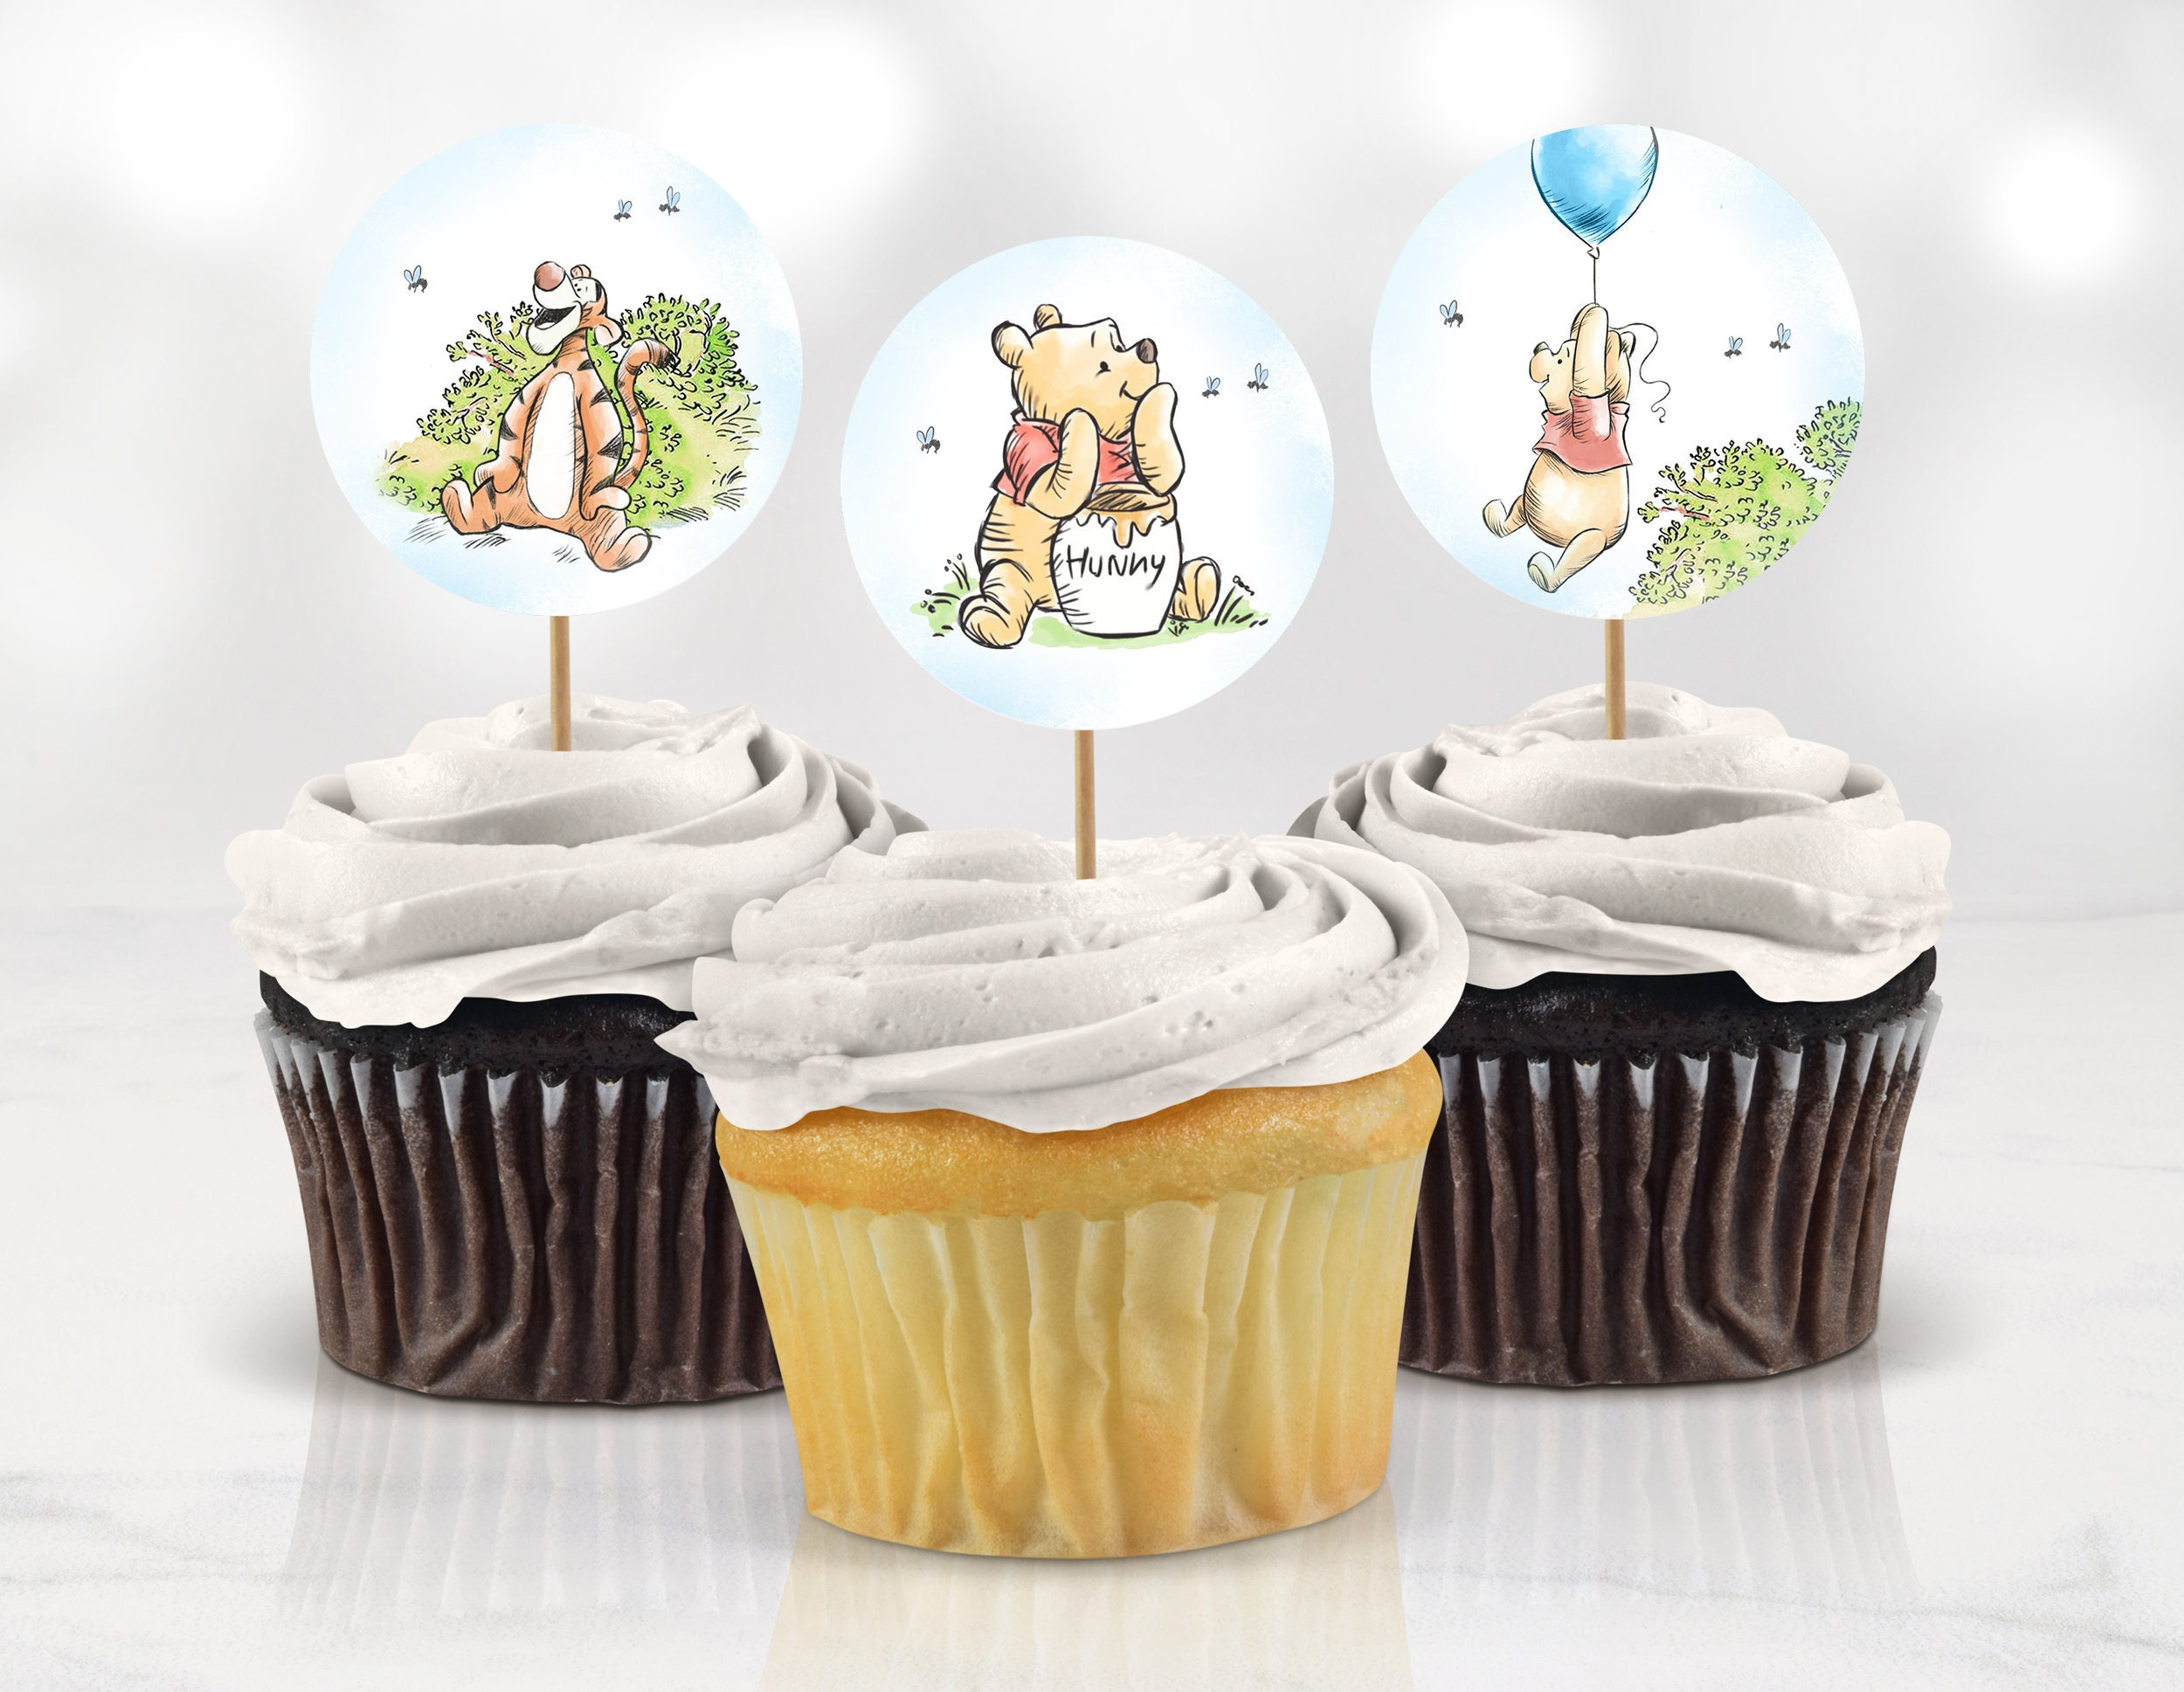 Winnie the Pooh and Friends Cake Topper – Bits & Bobs 4 Bubs